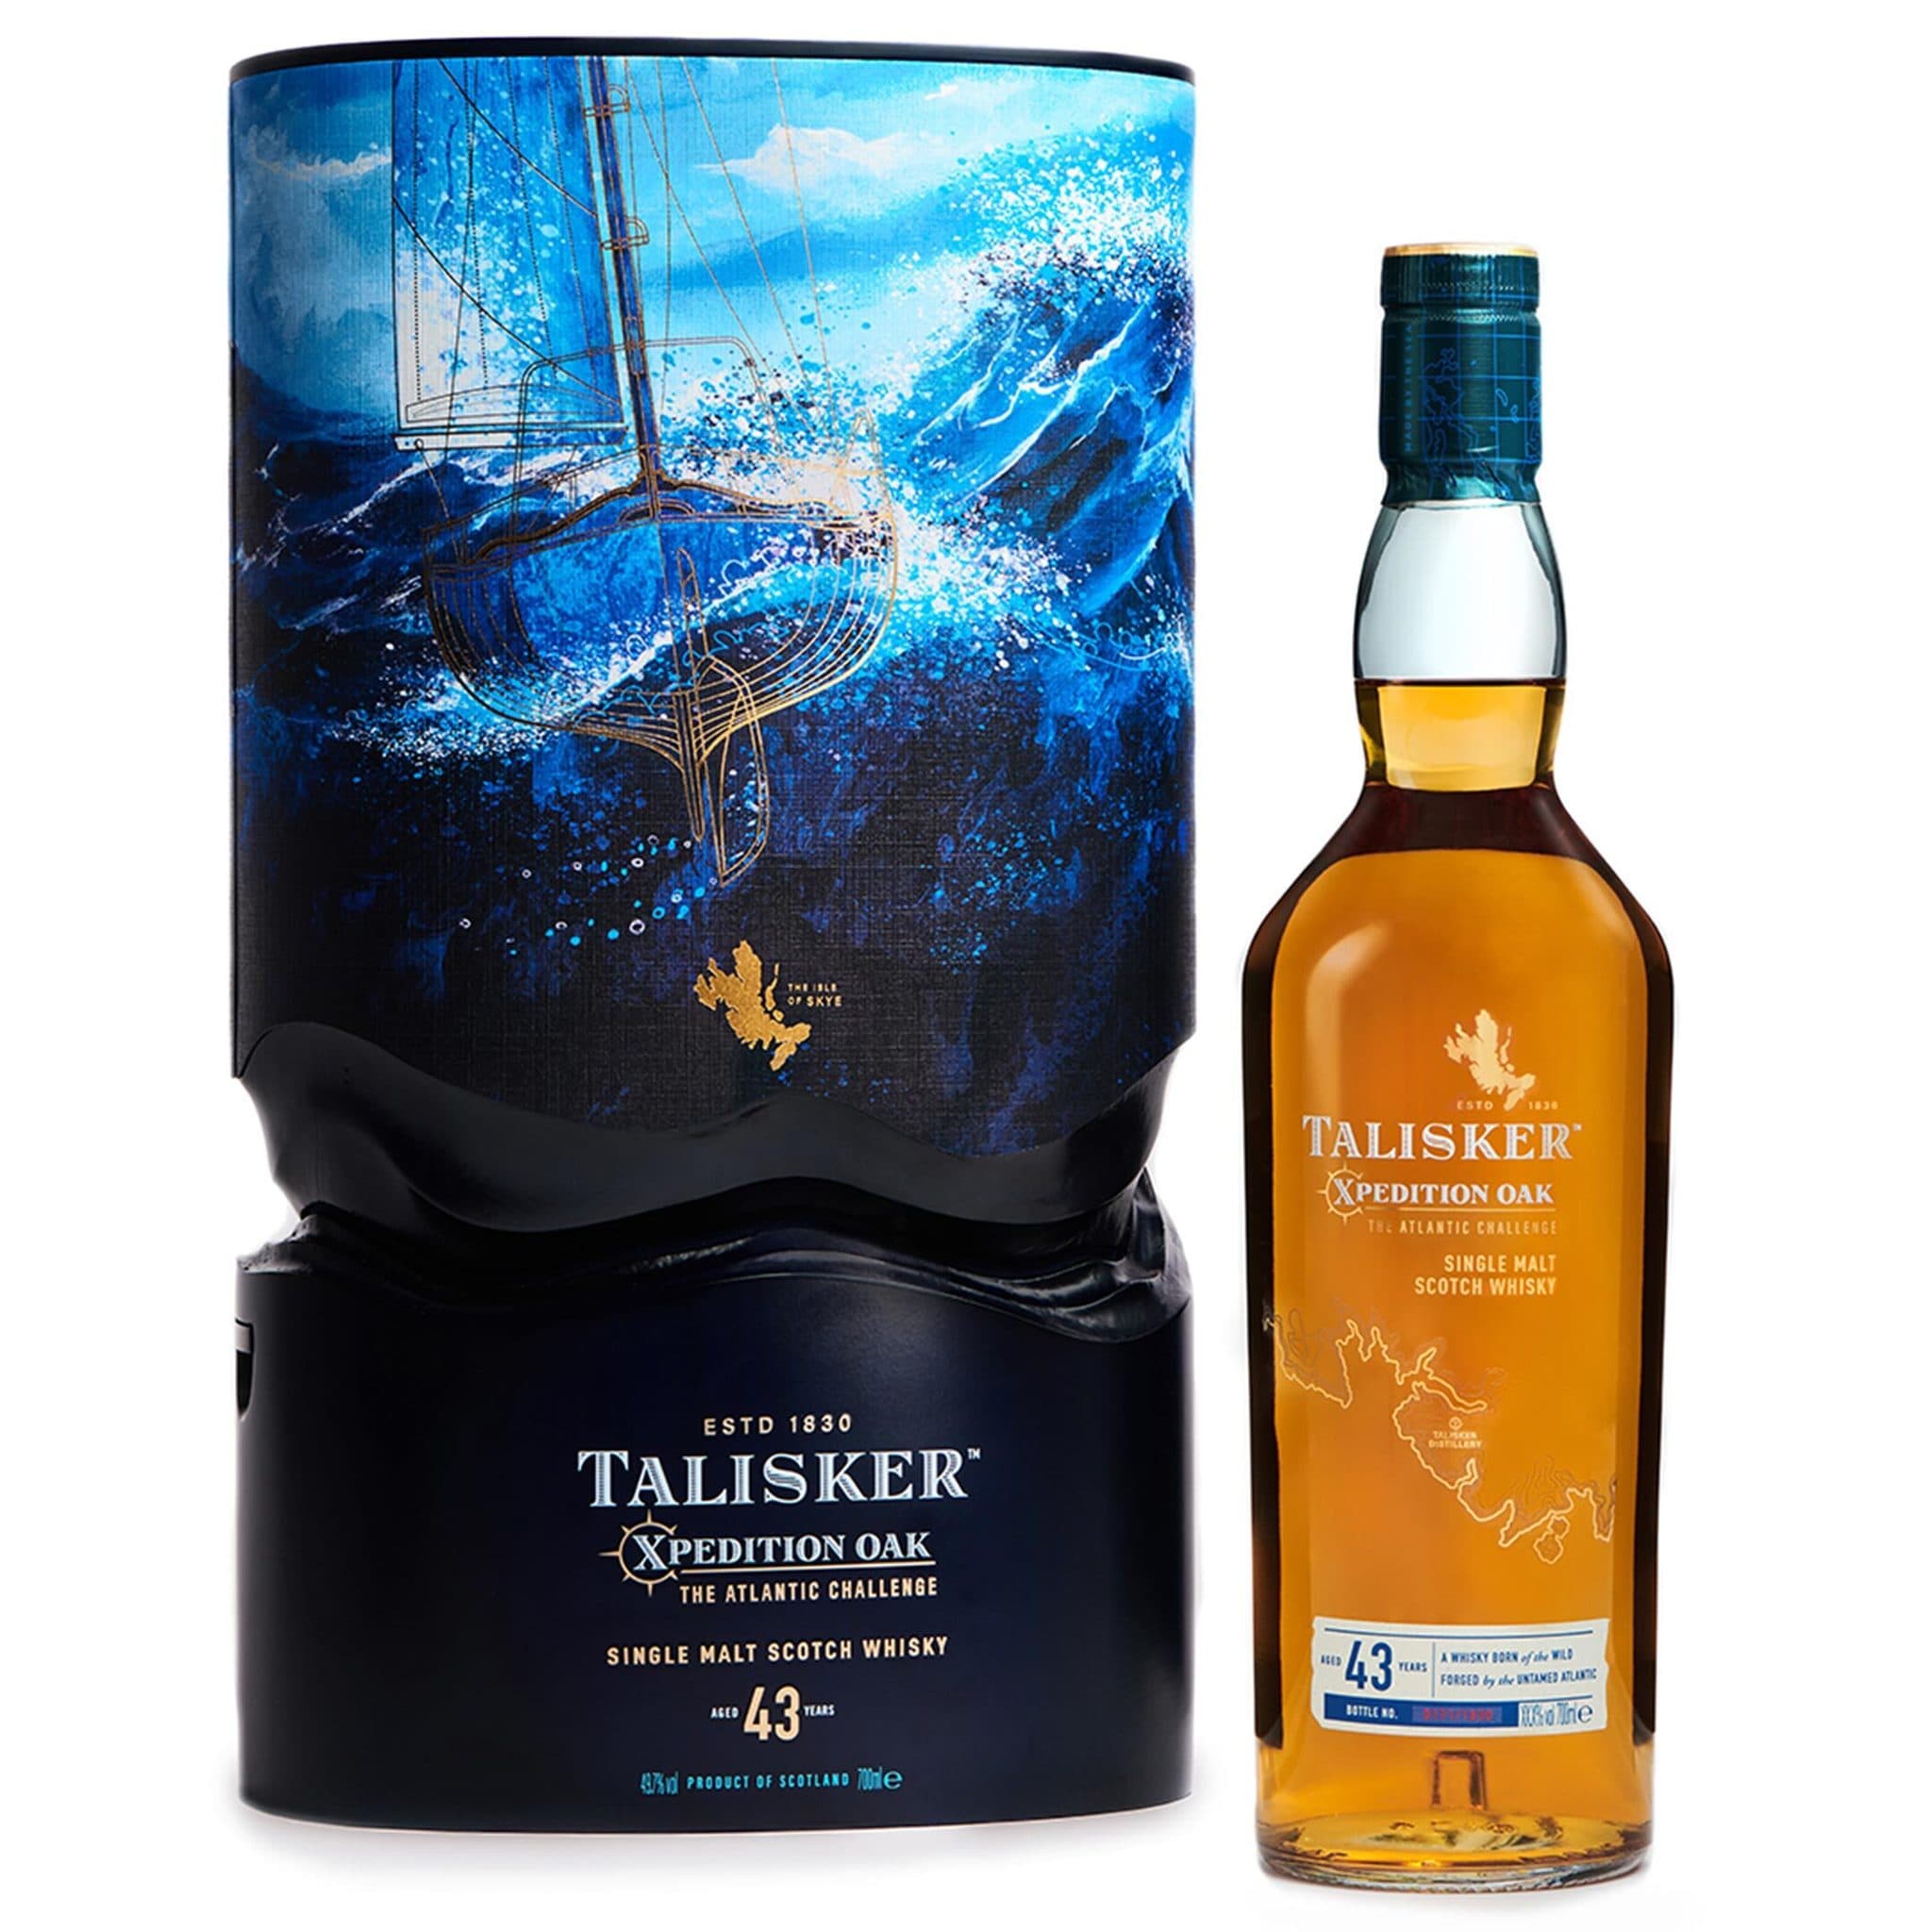 Talisker 43 Year Old Xpedition Oak Bottle and Box